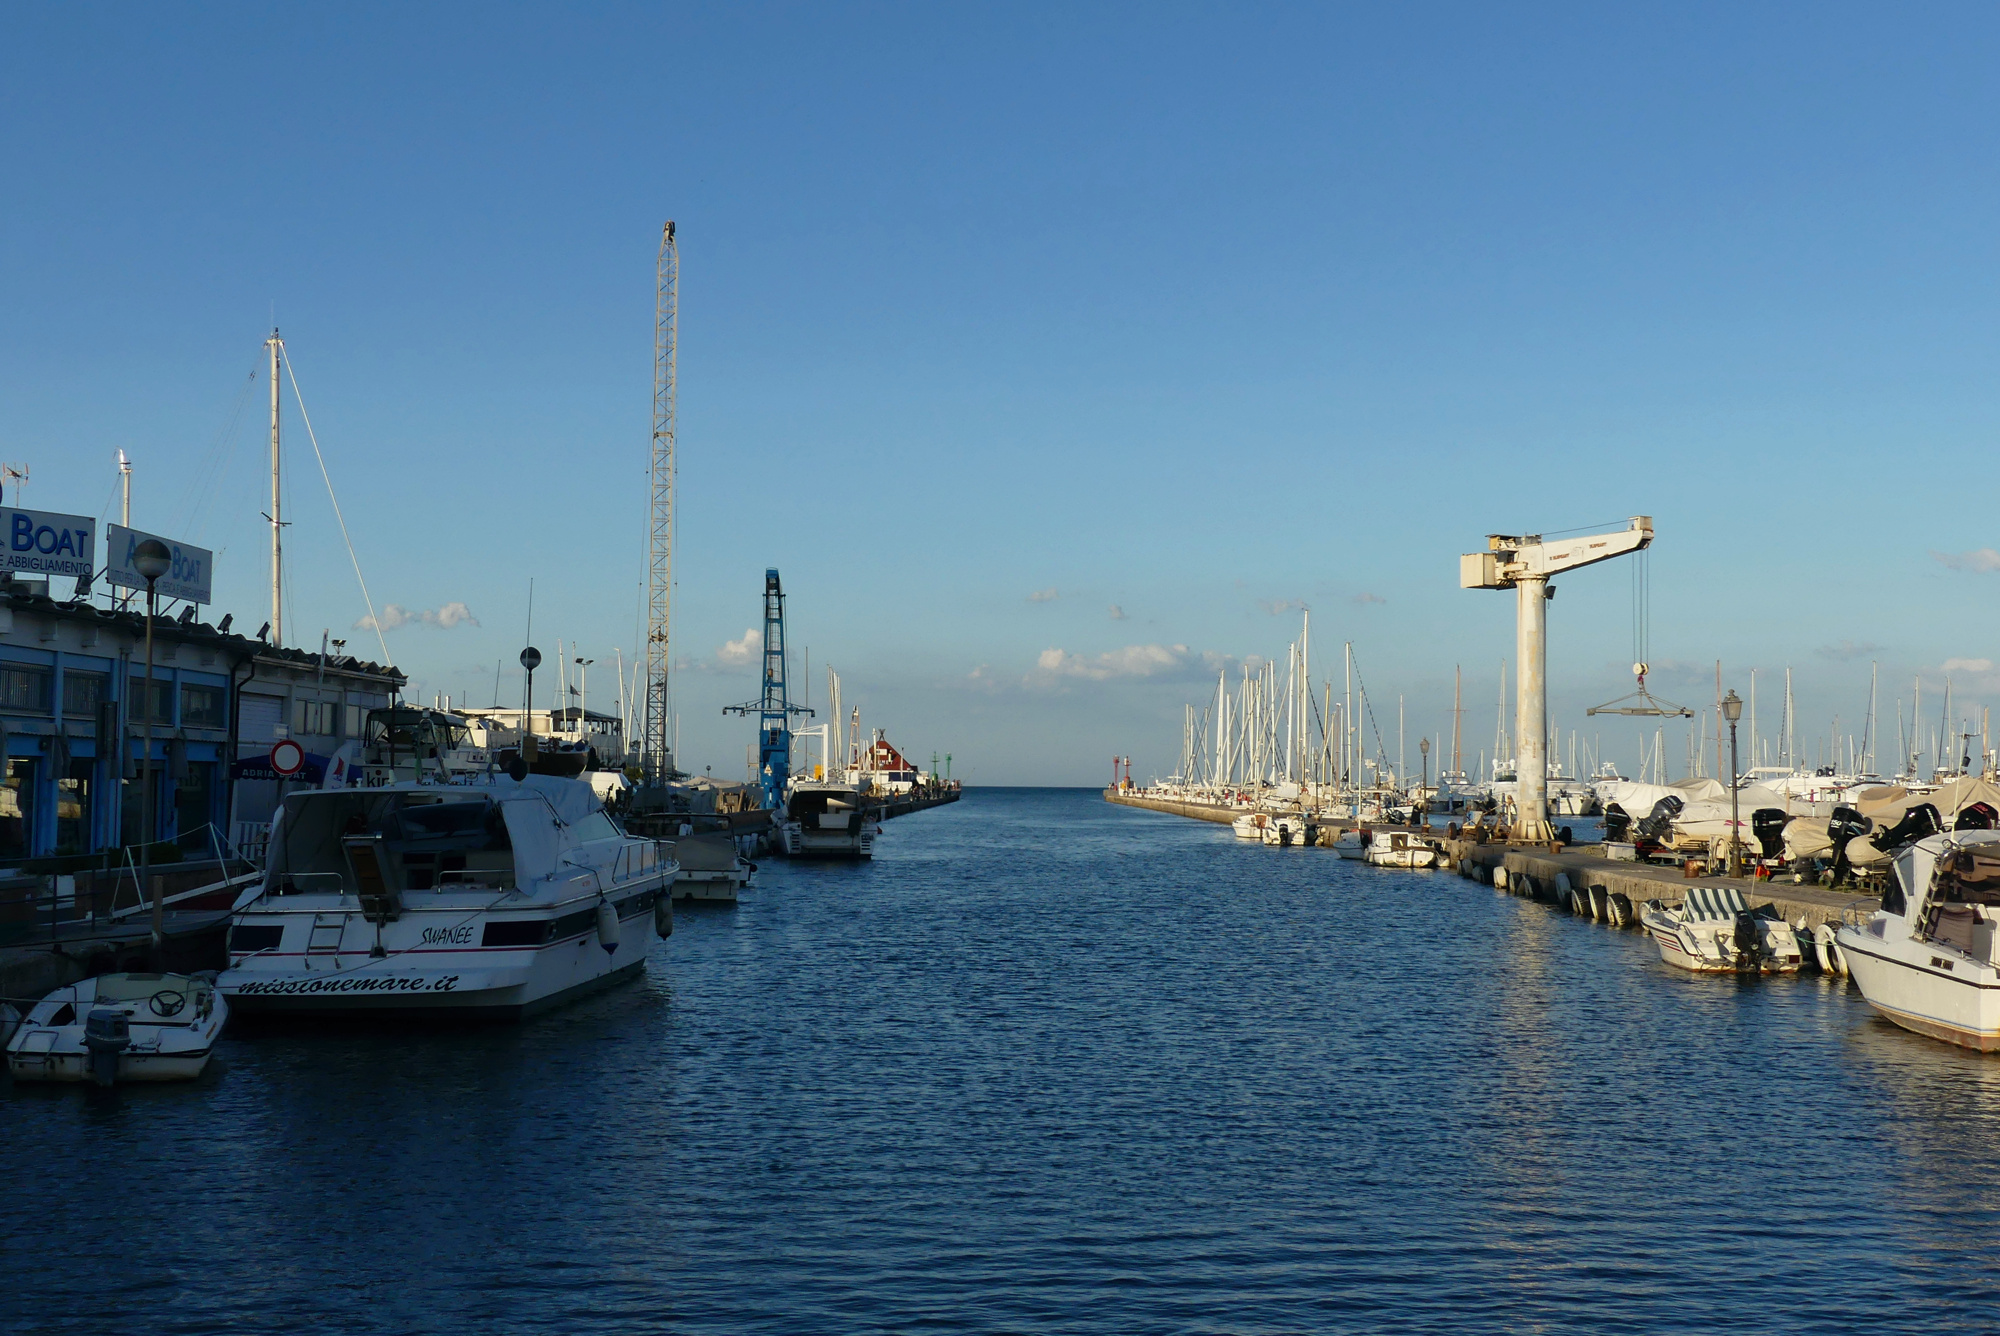 cervia-canale.jpg